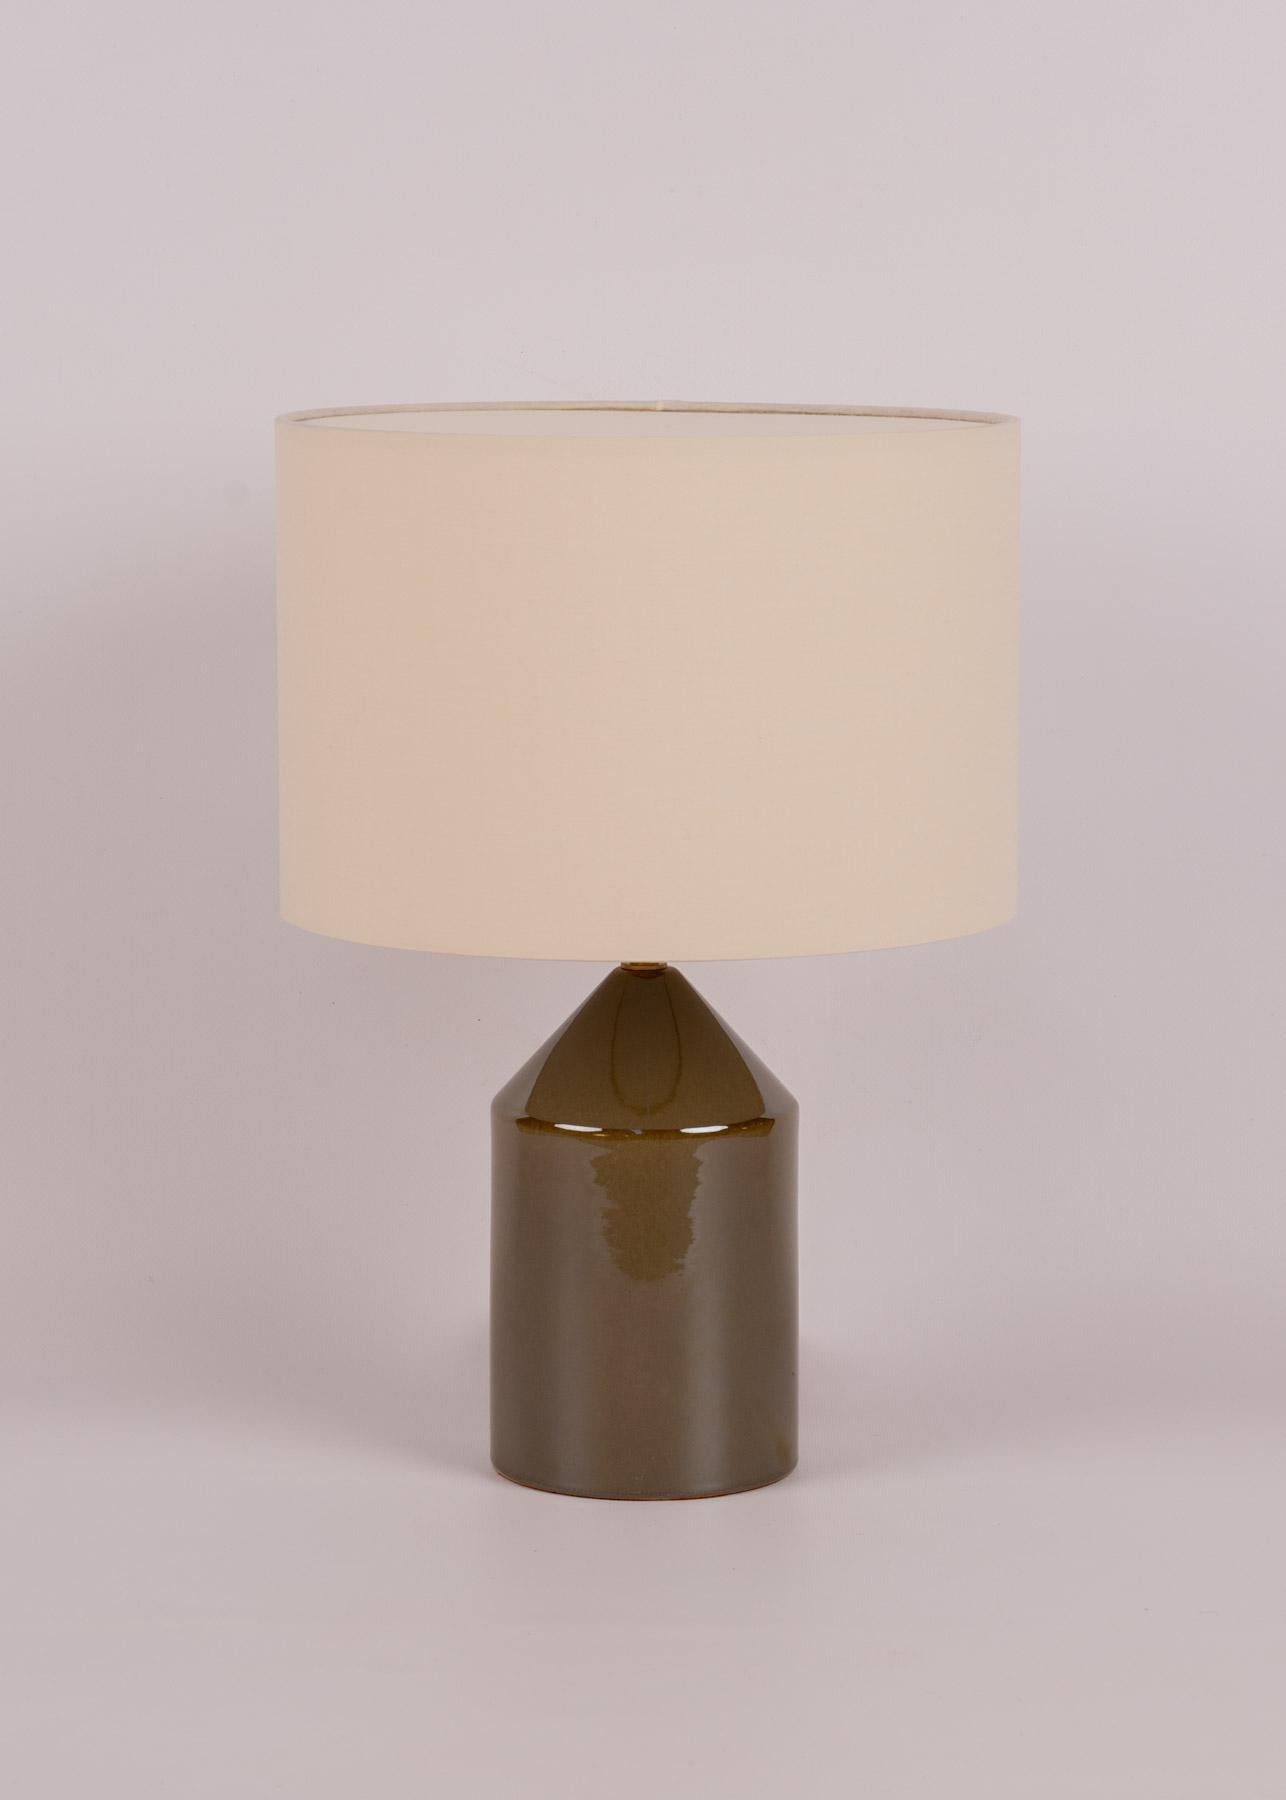 Green Ceramic Josef Table Lamp by Simone & Marcel
Dimensions: Ø 30 x H 41.5 cm.
Materials: Brass, cotton and ceramic.

Also available in different marble, wood and alabaster options and finishes. Custom options available on request. Please contact